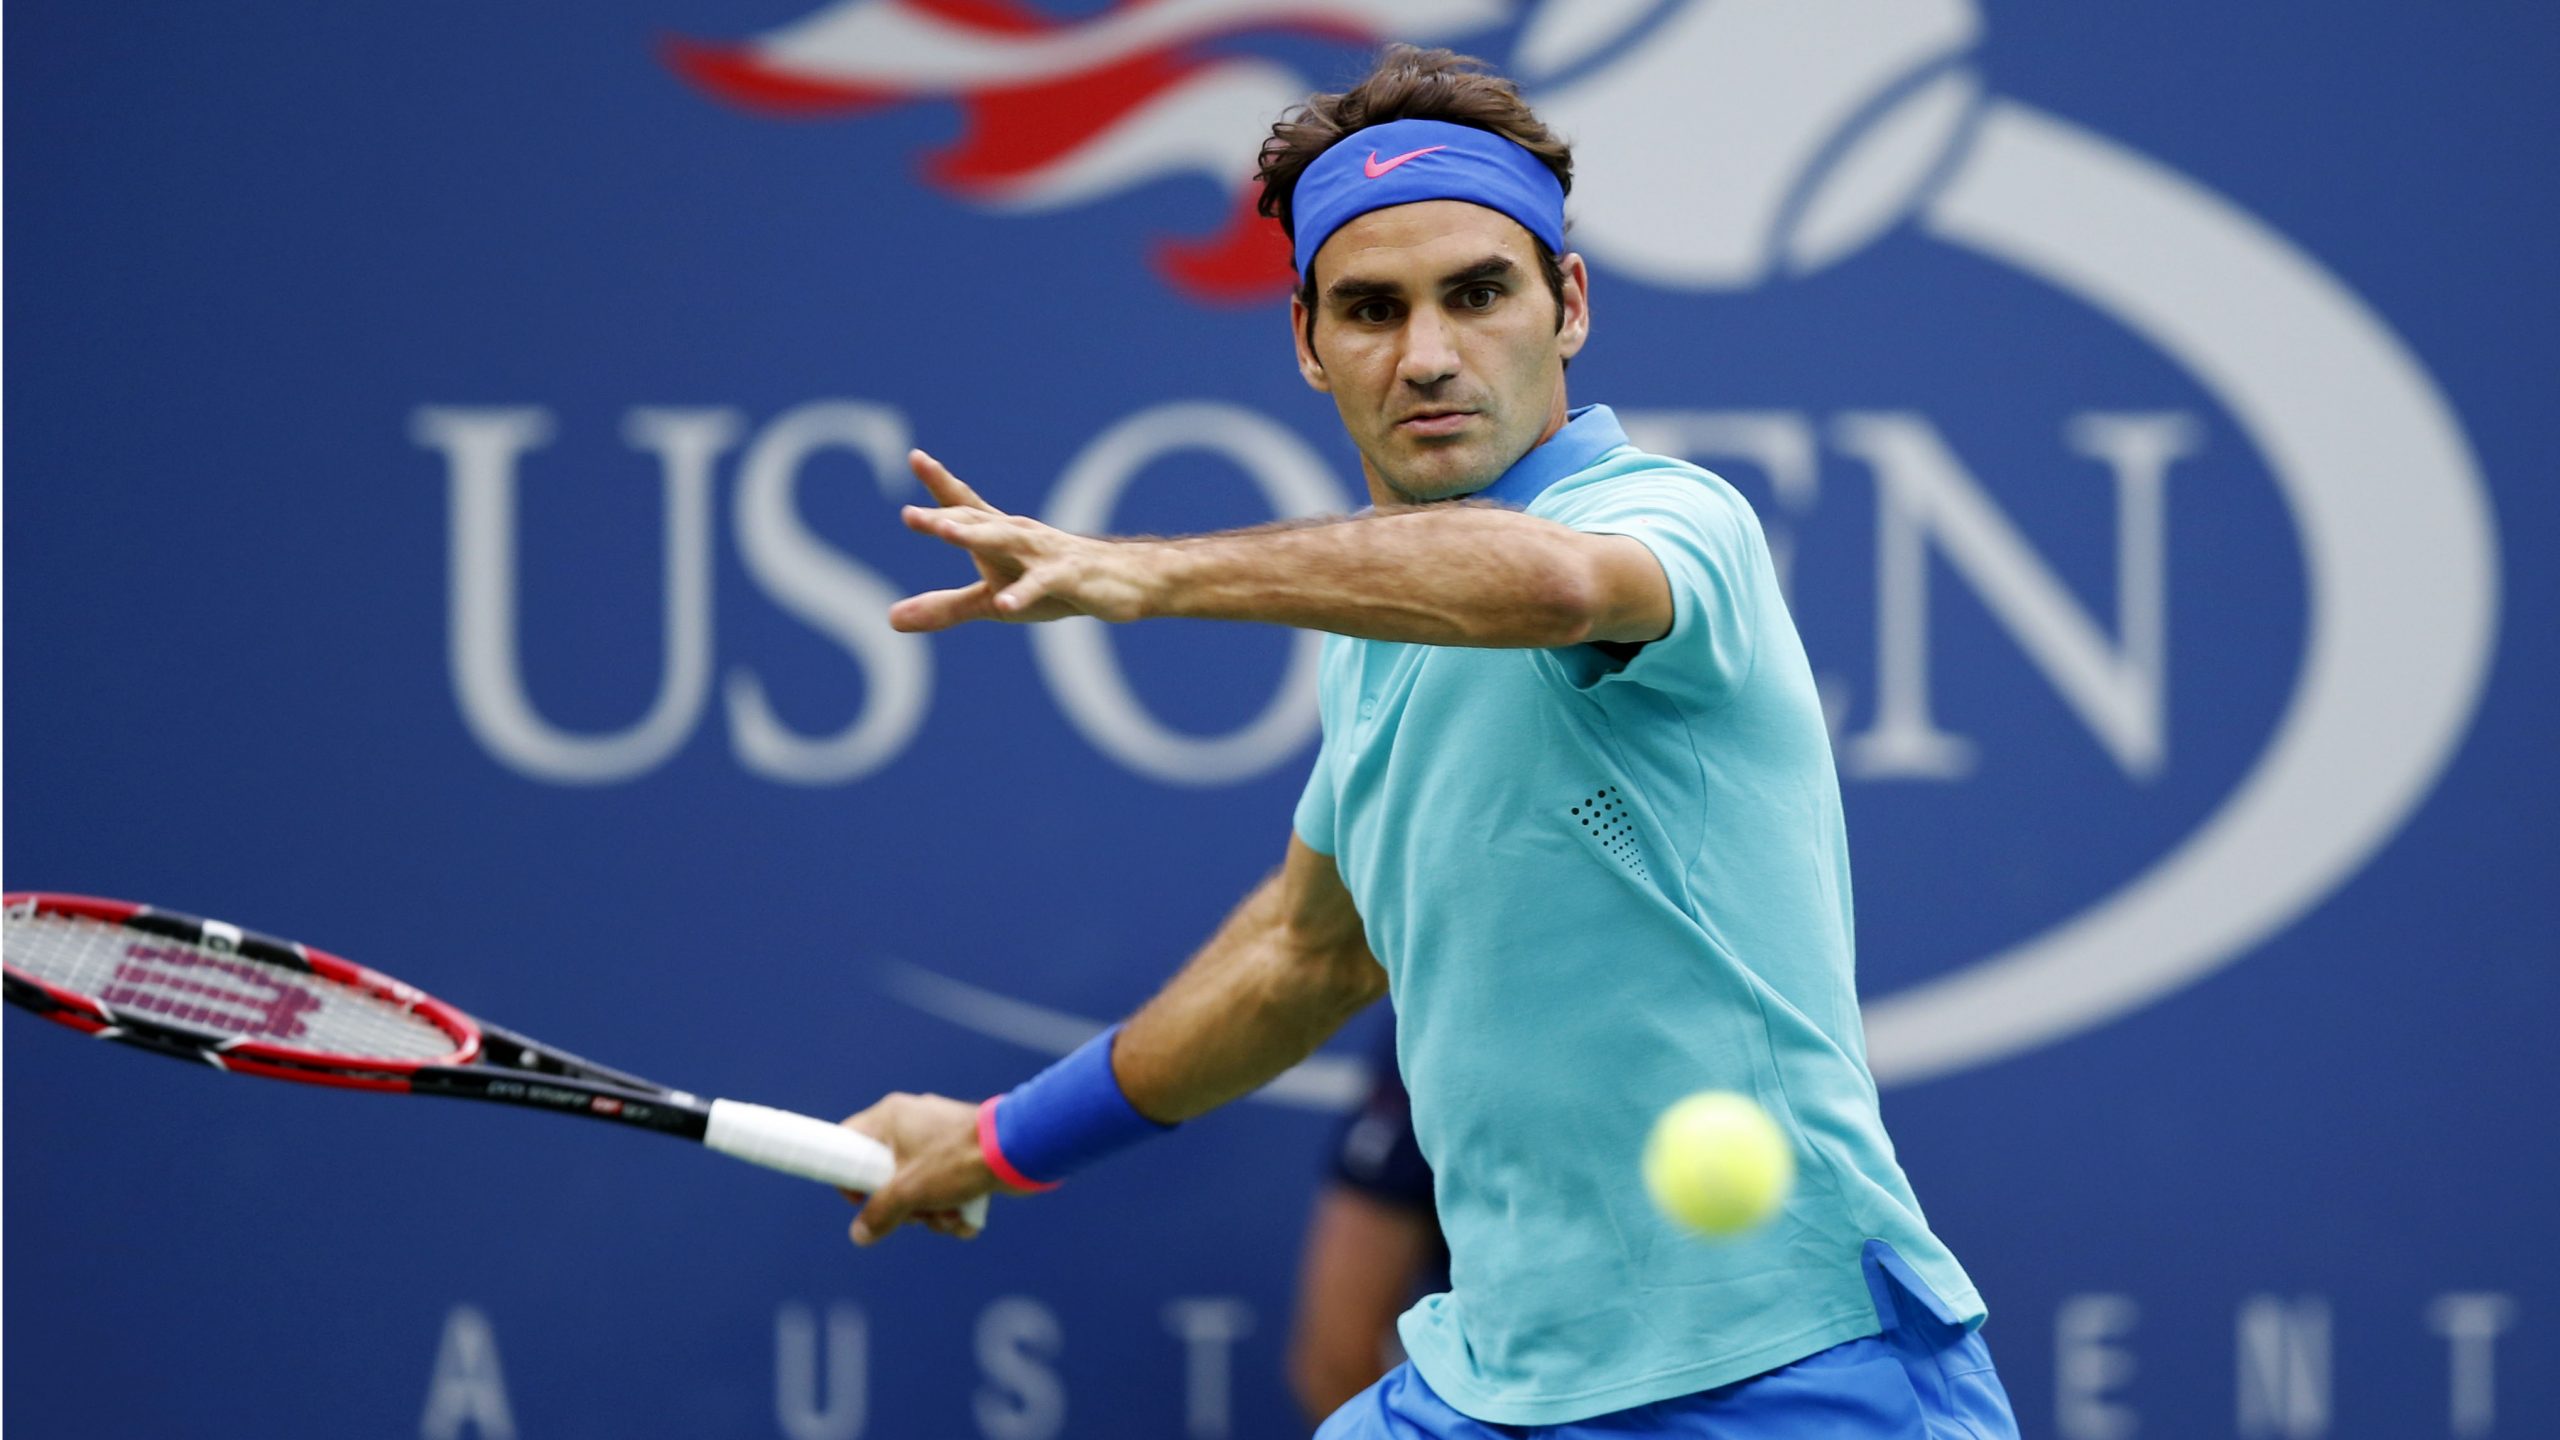 Roger Federer tries to end decade long drought at U.S